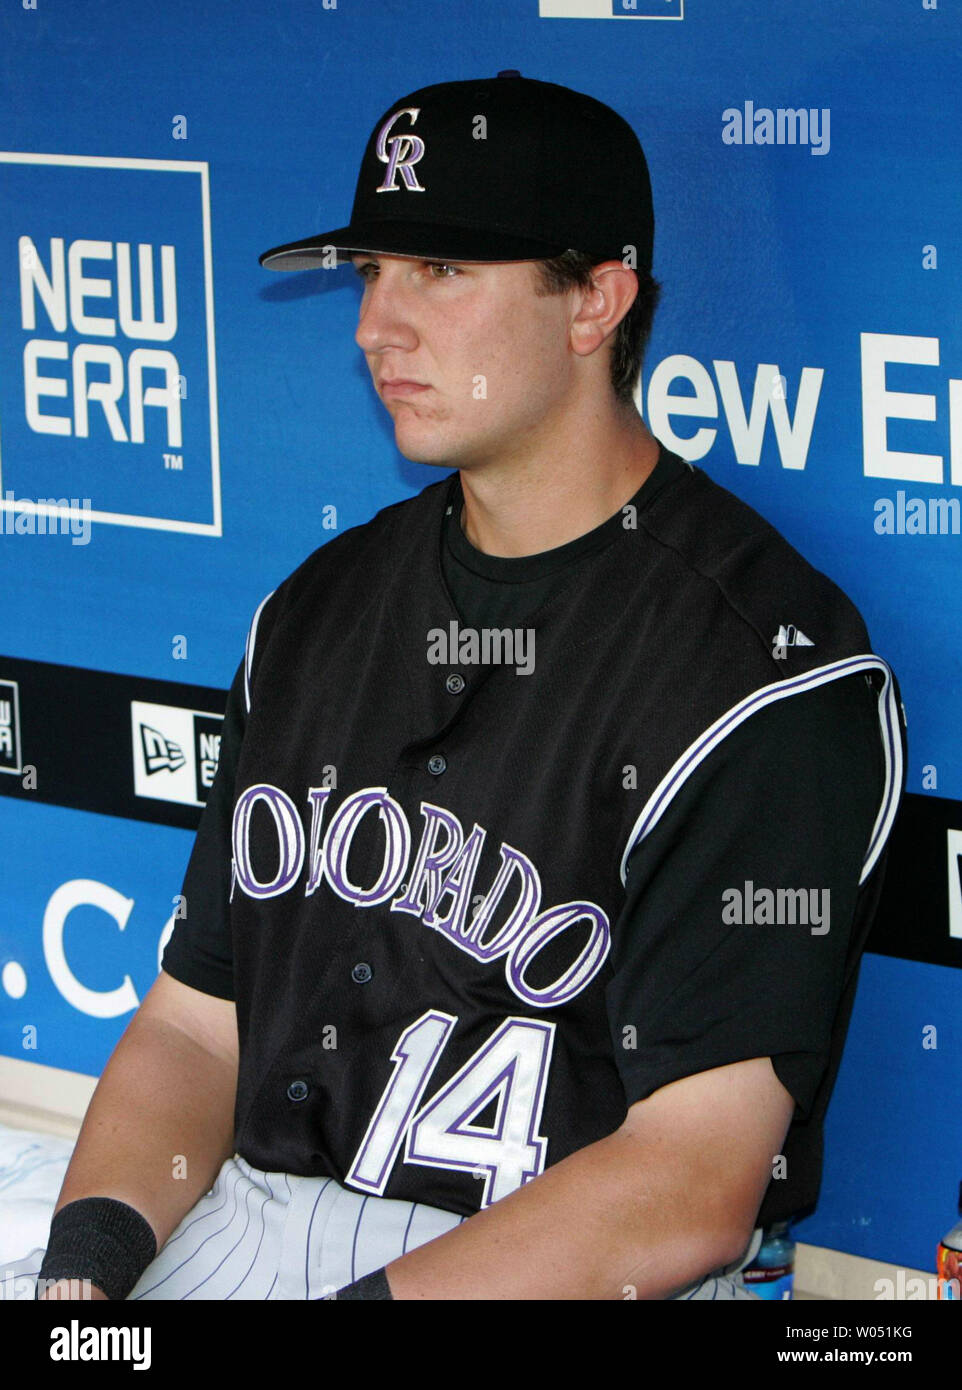 Troy Tulowitzki Wife, Height, Weight, Measurements, Salary, Other